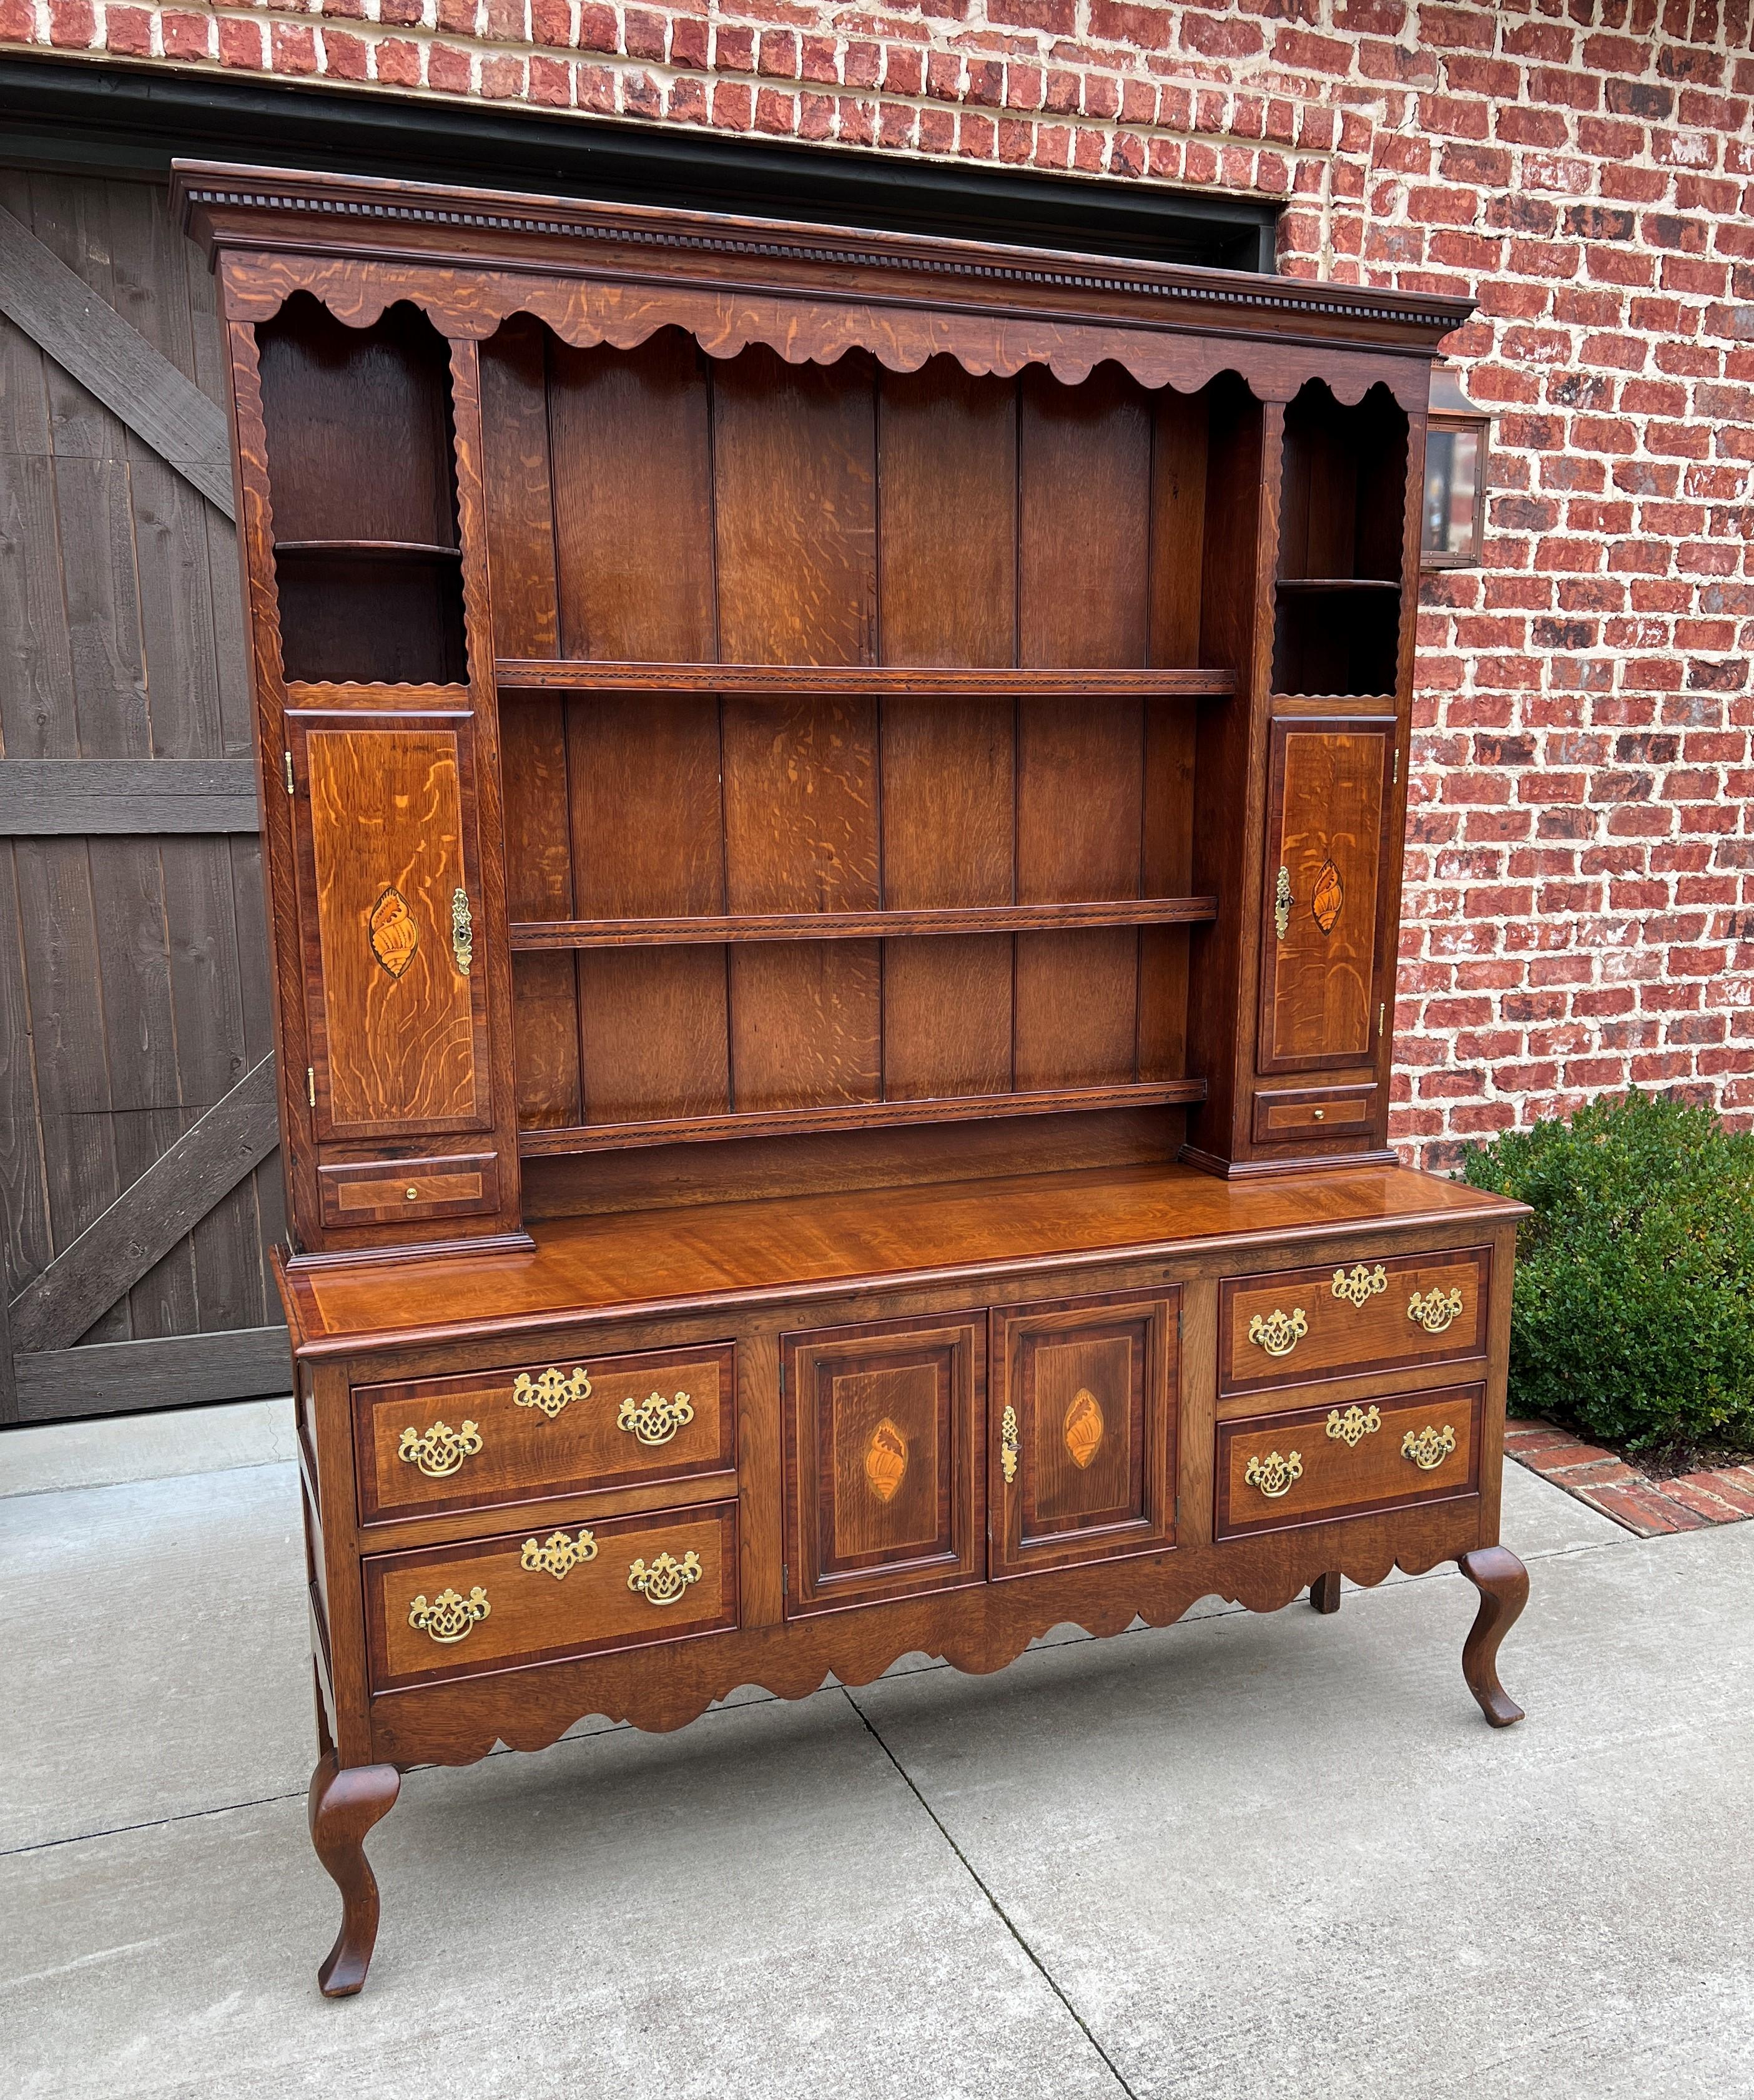 GORGEOUS Antique English oak and mahogany georgian era plate dresser, sideboard, hutch cabinet, server or buffet~~early 19th century

 These pieces, commonly known as 